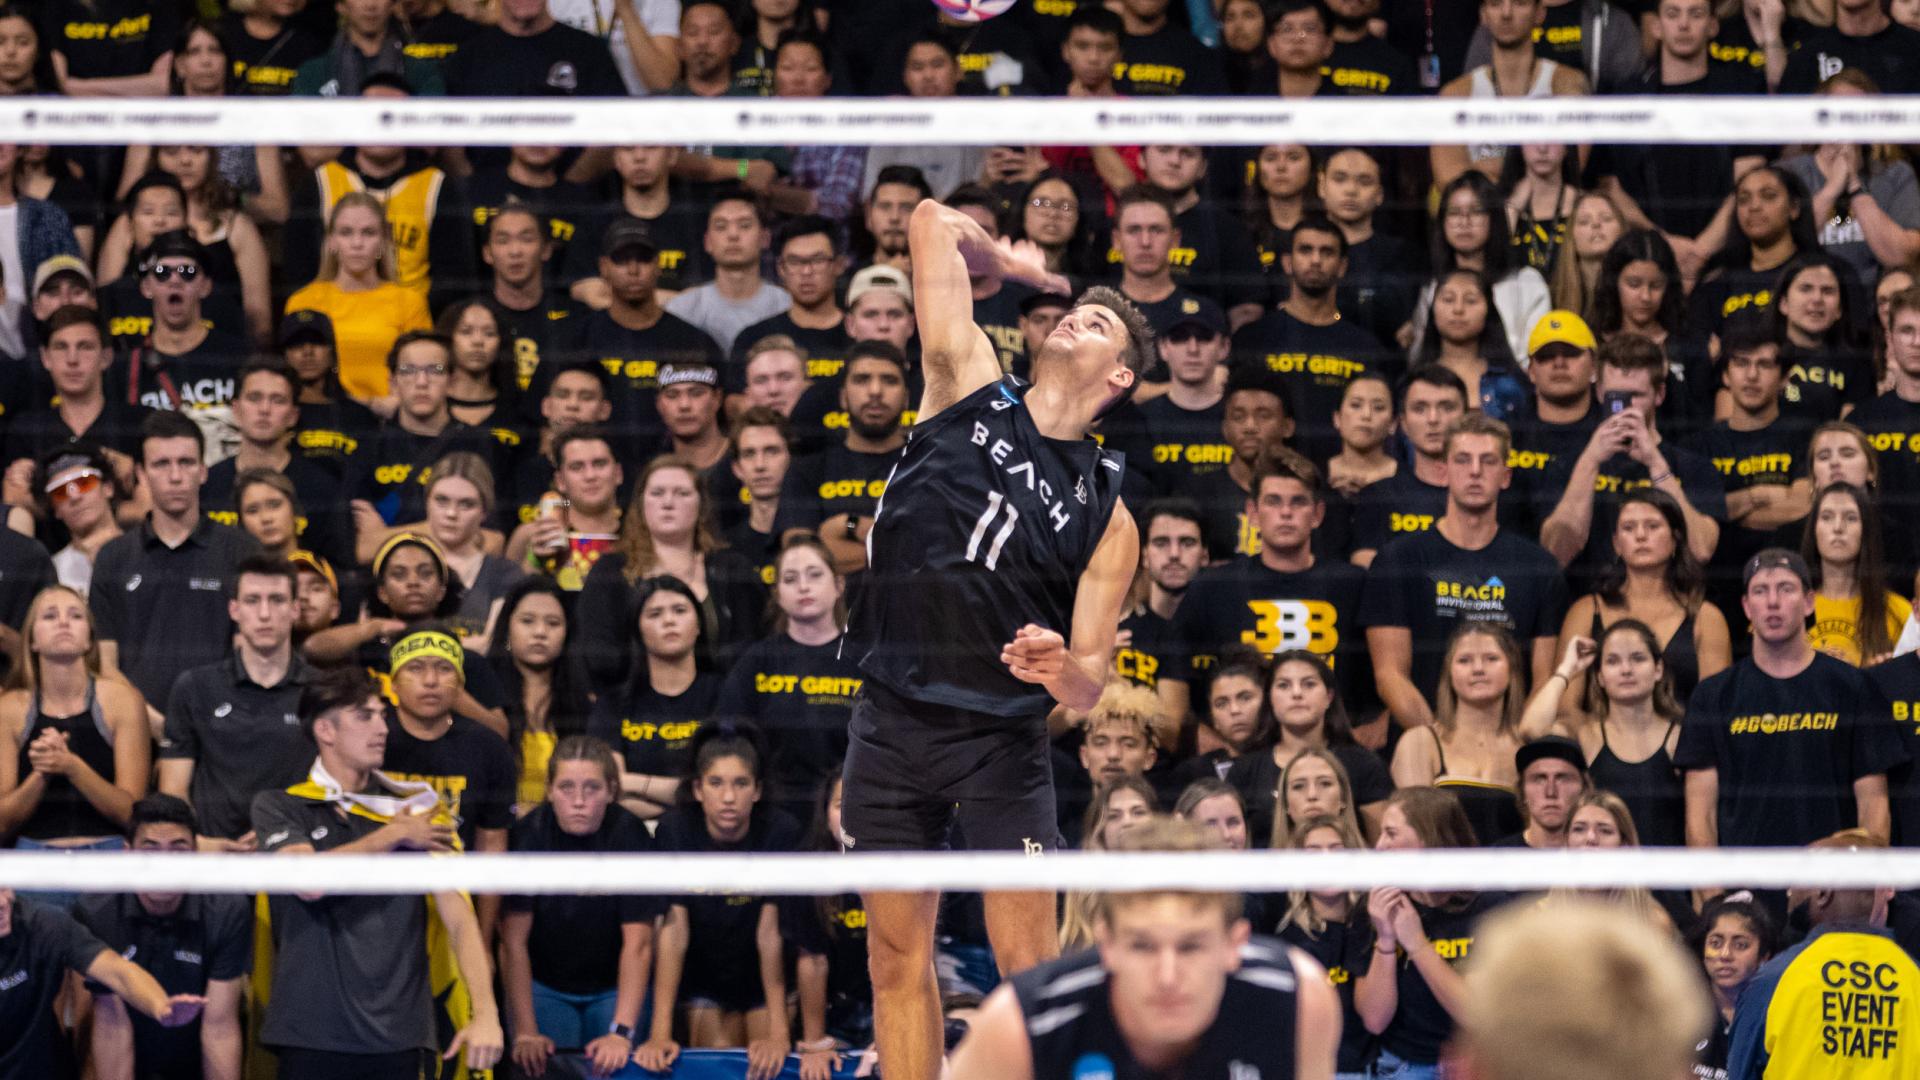 TJ Defalco spikes volleyball